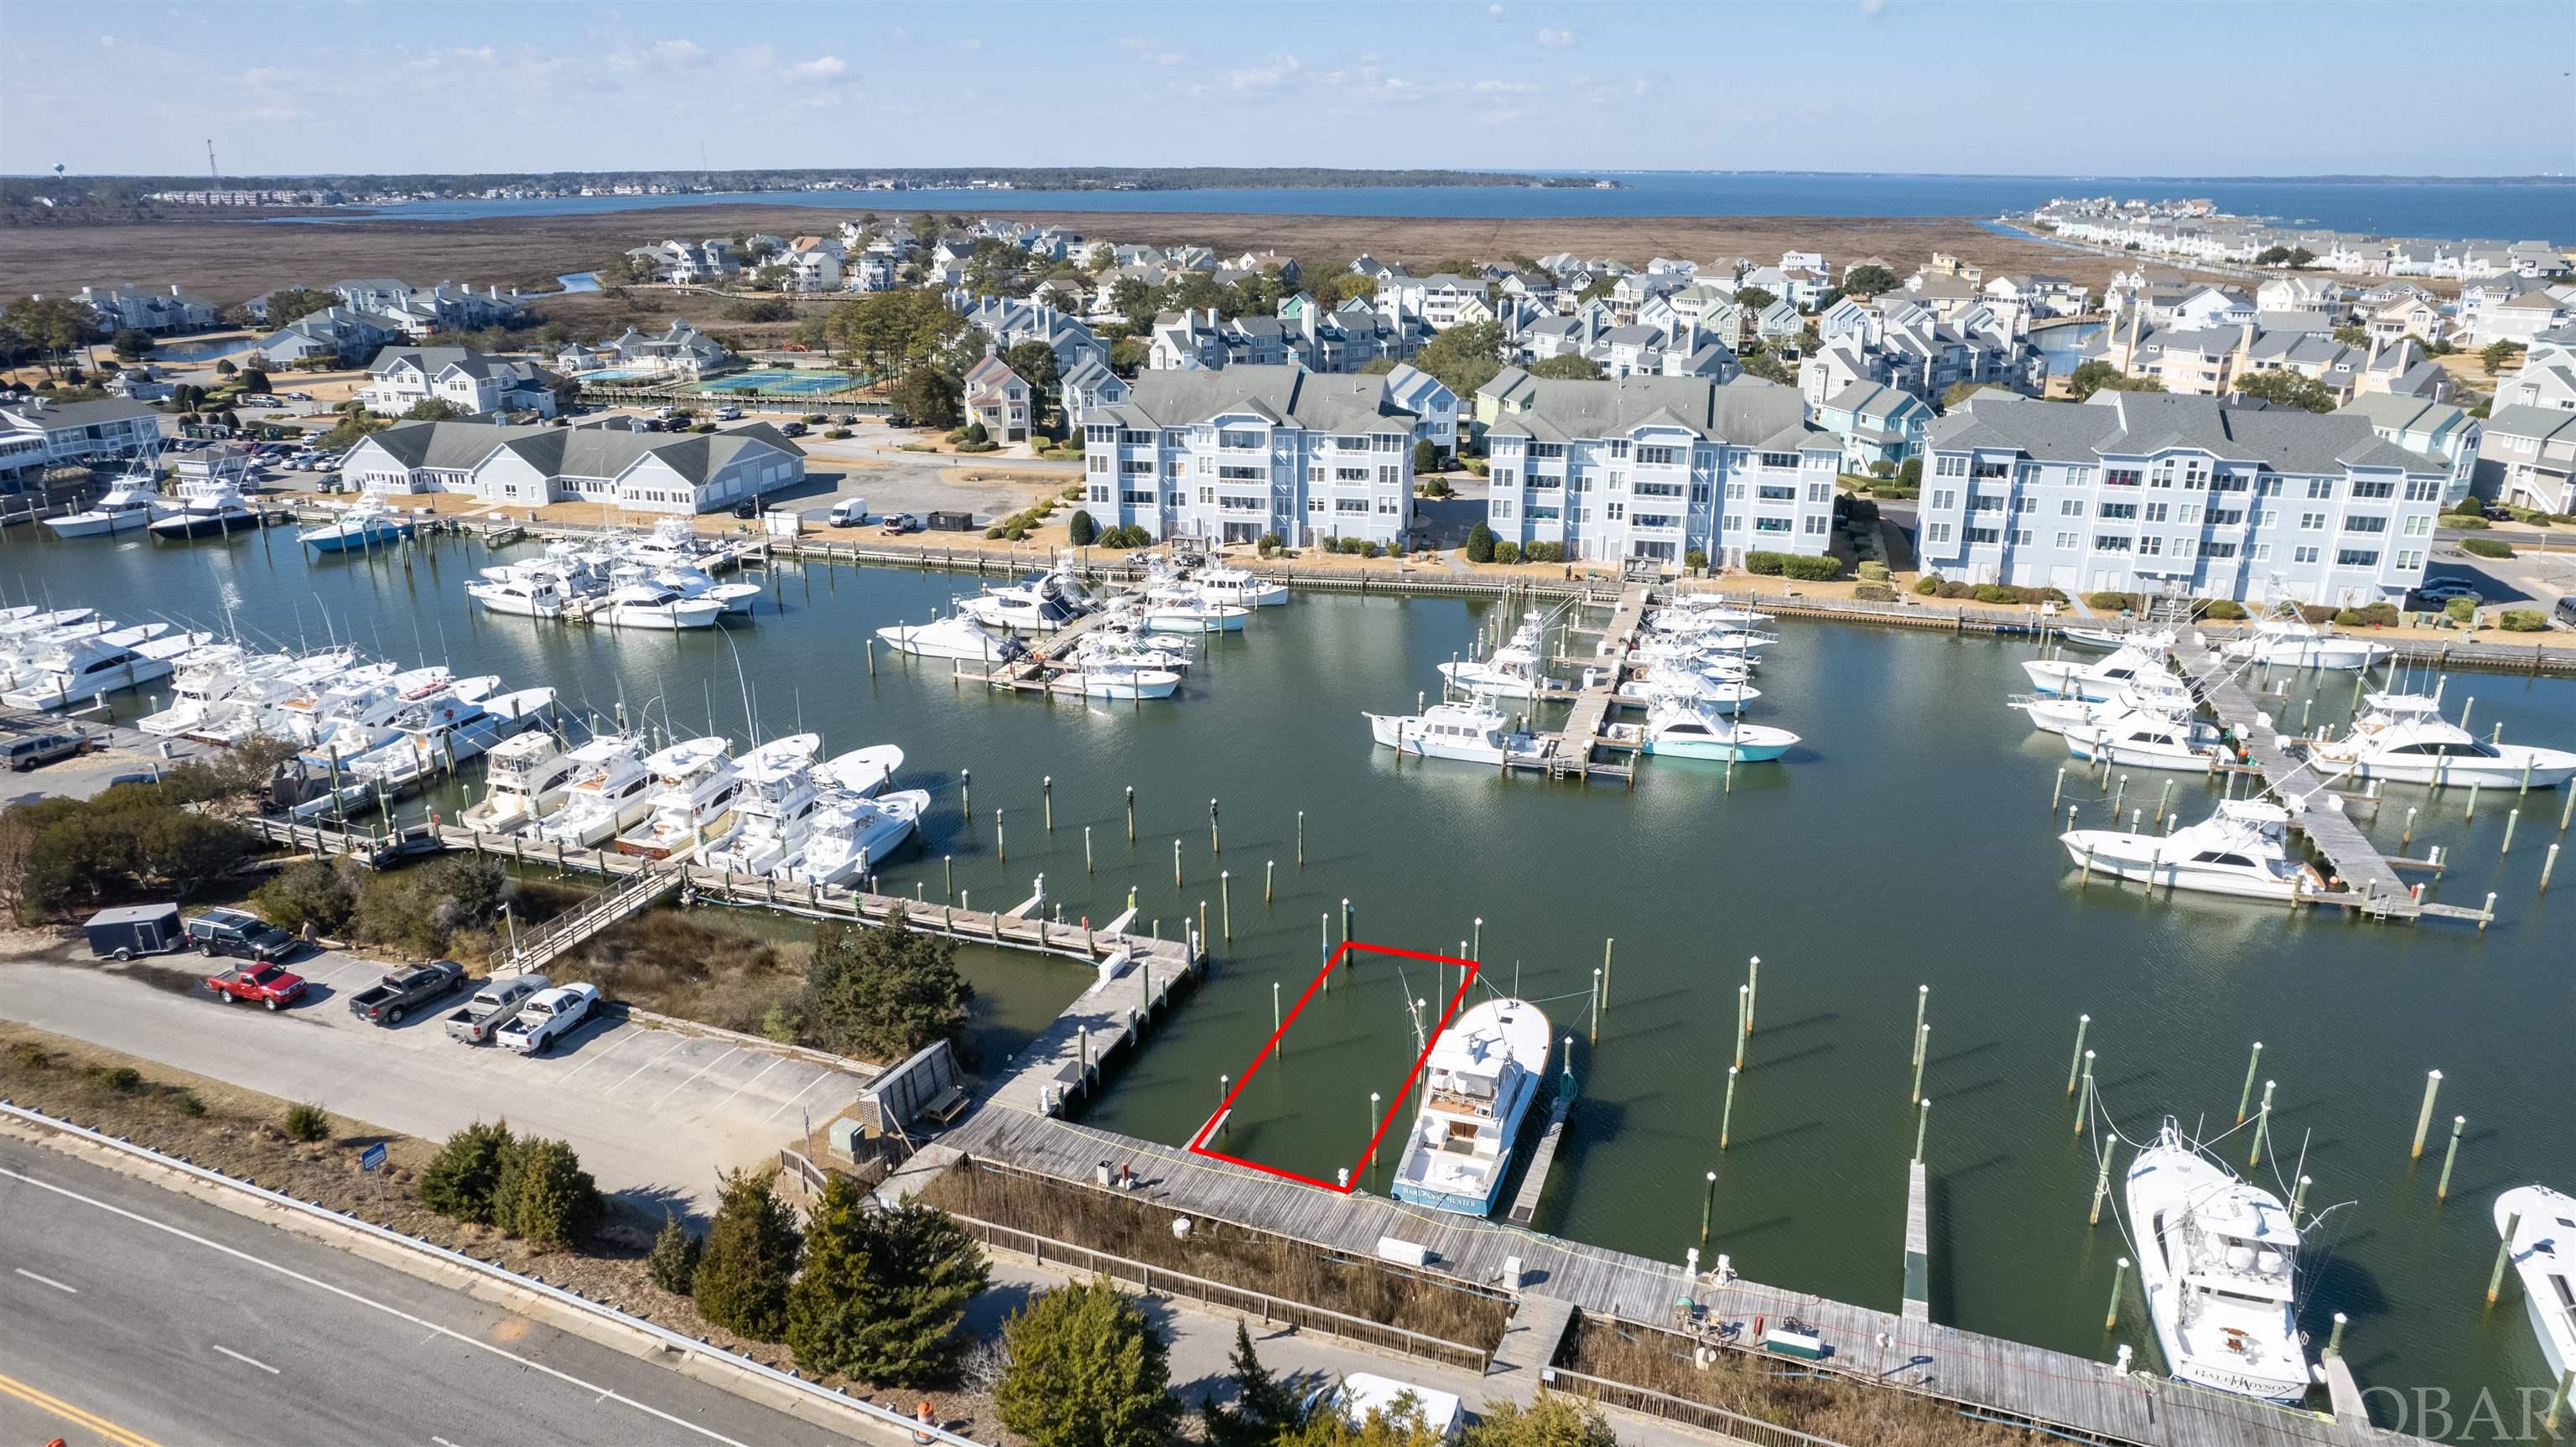 5 Yacht Club Court, Manteo, NC 27954, ,Lots/land,For sale,Yacht Club Court,124692